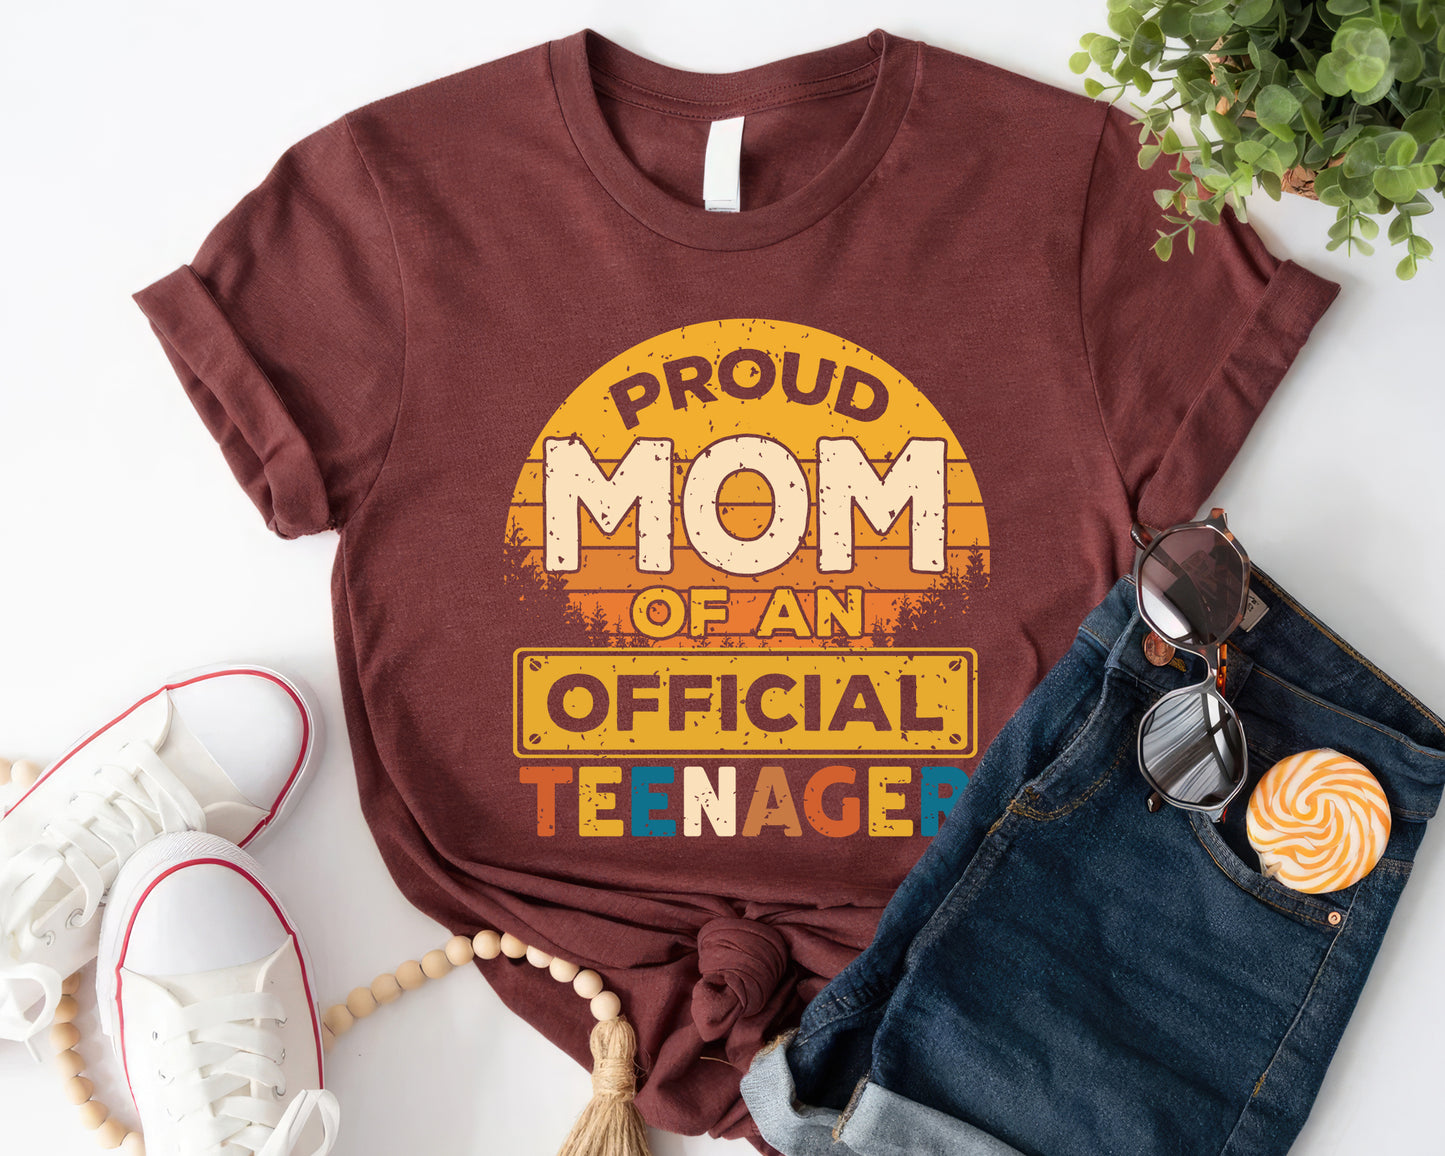 Retro Sunset Proud MOM of An Official Teenager Tee - Retro Style T-shirt Design | Mother's Day | Graduation day | Coming-of-age Ceremony - maroon